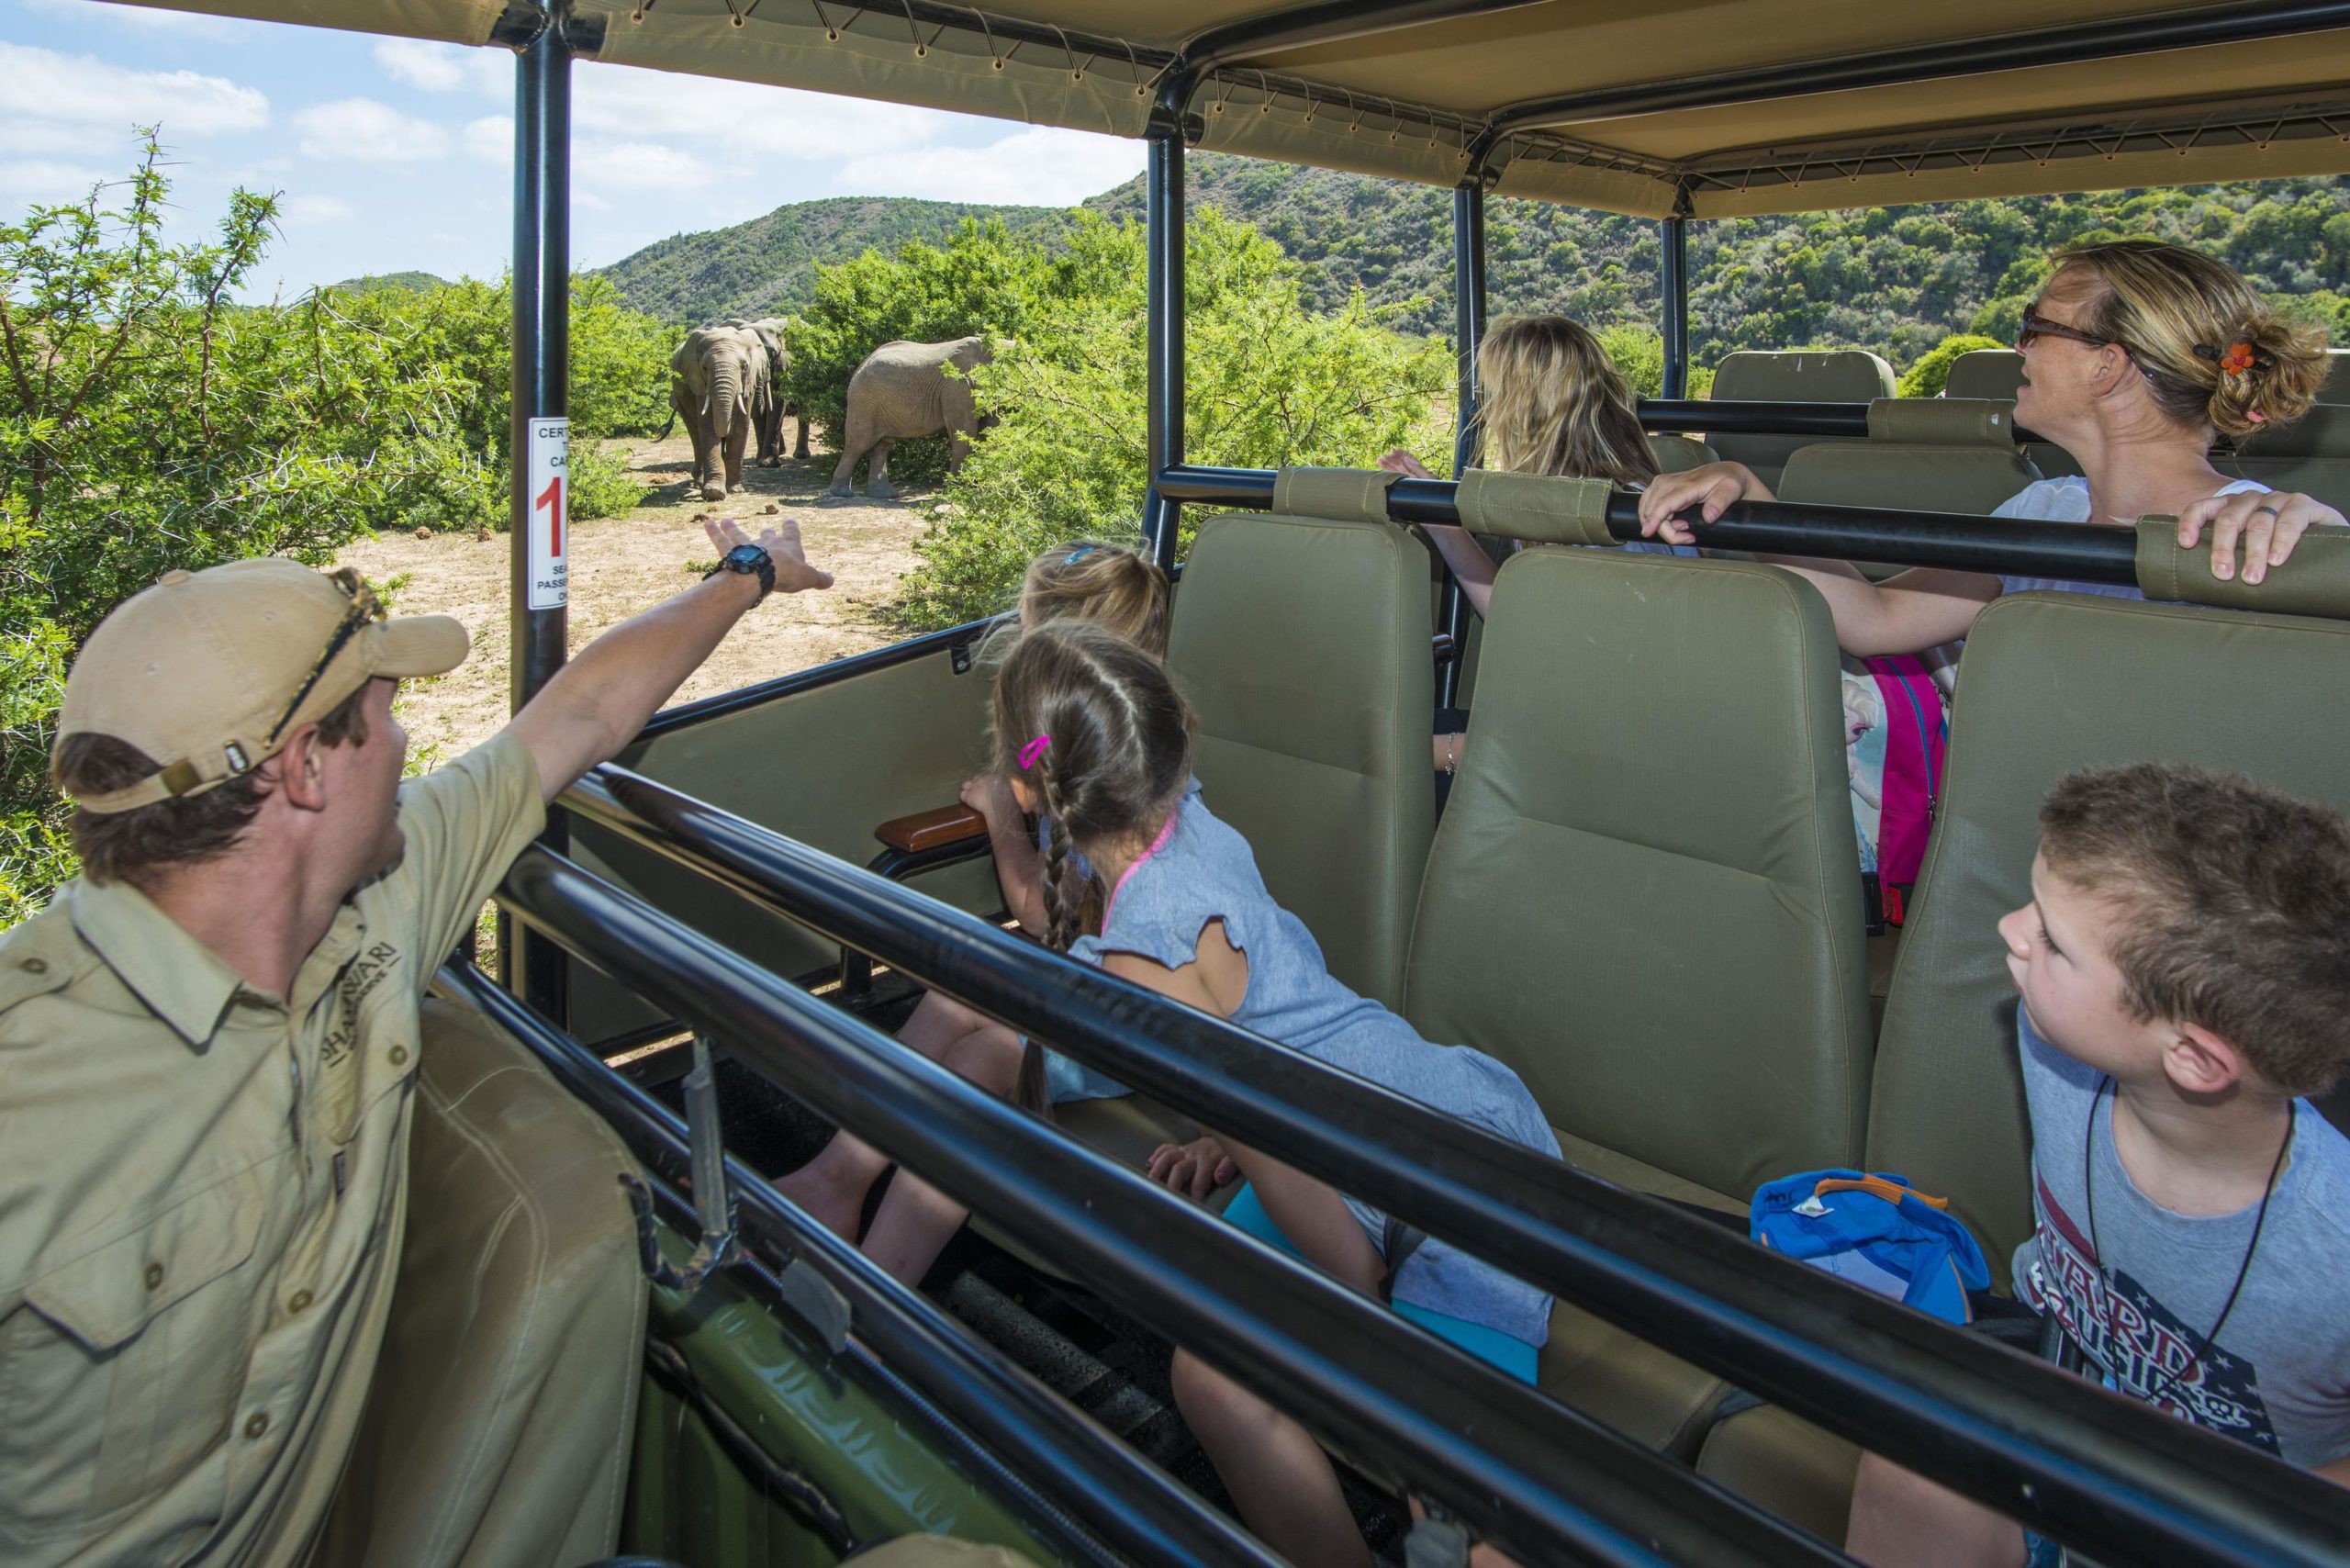 Experience a remarkable South African safari like this family-focused game-drive when you take a tailor-made holiday with Alfred&.